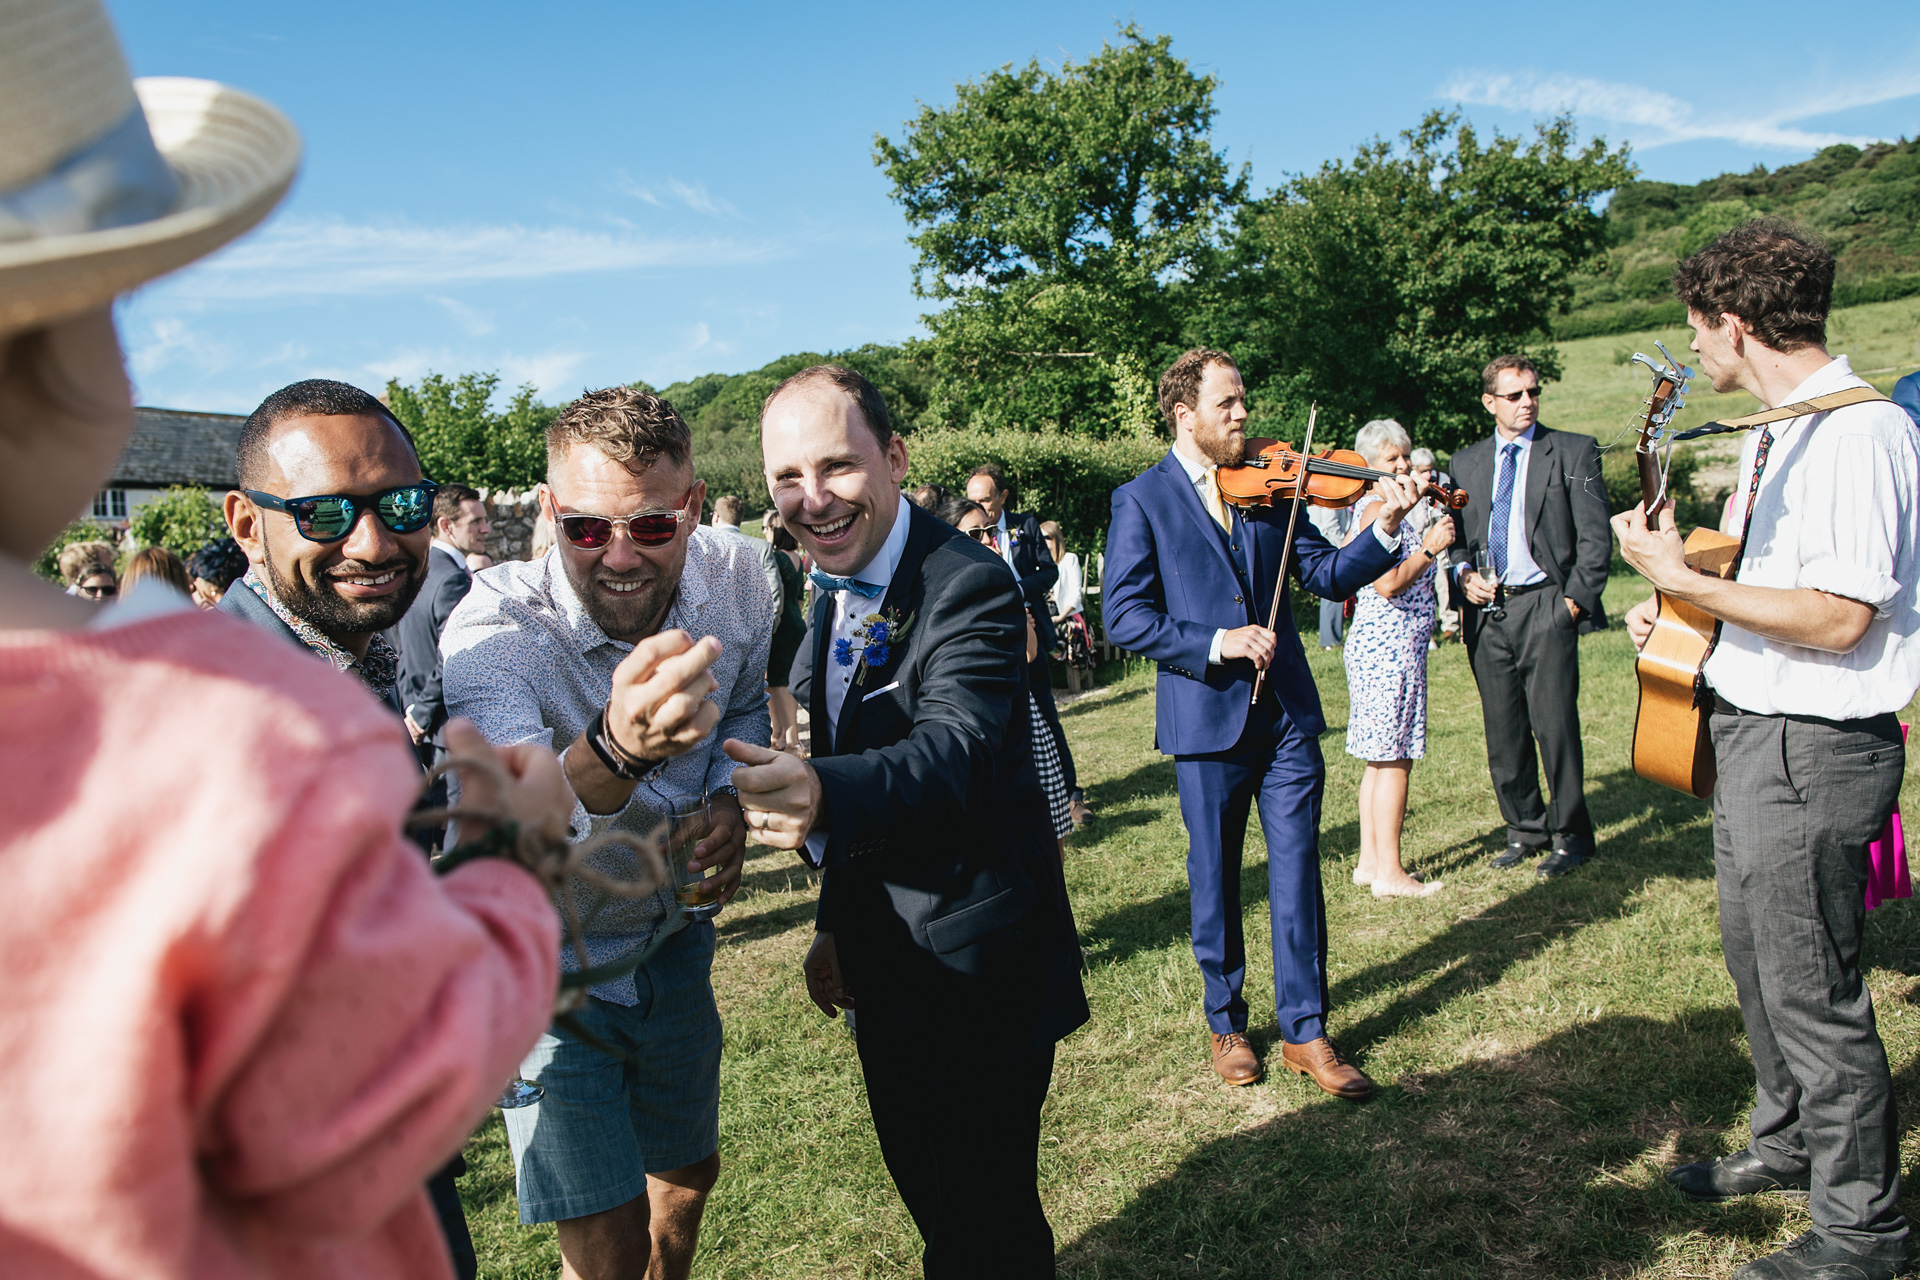 Wedding guests laughing in a field